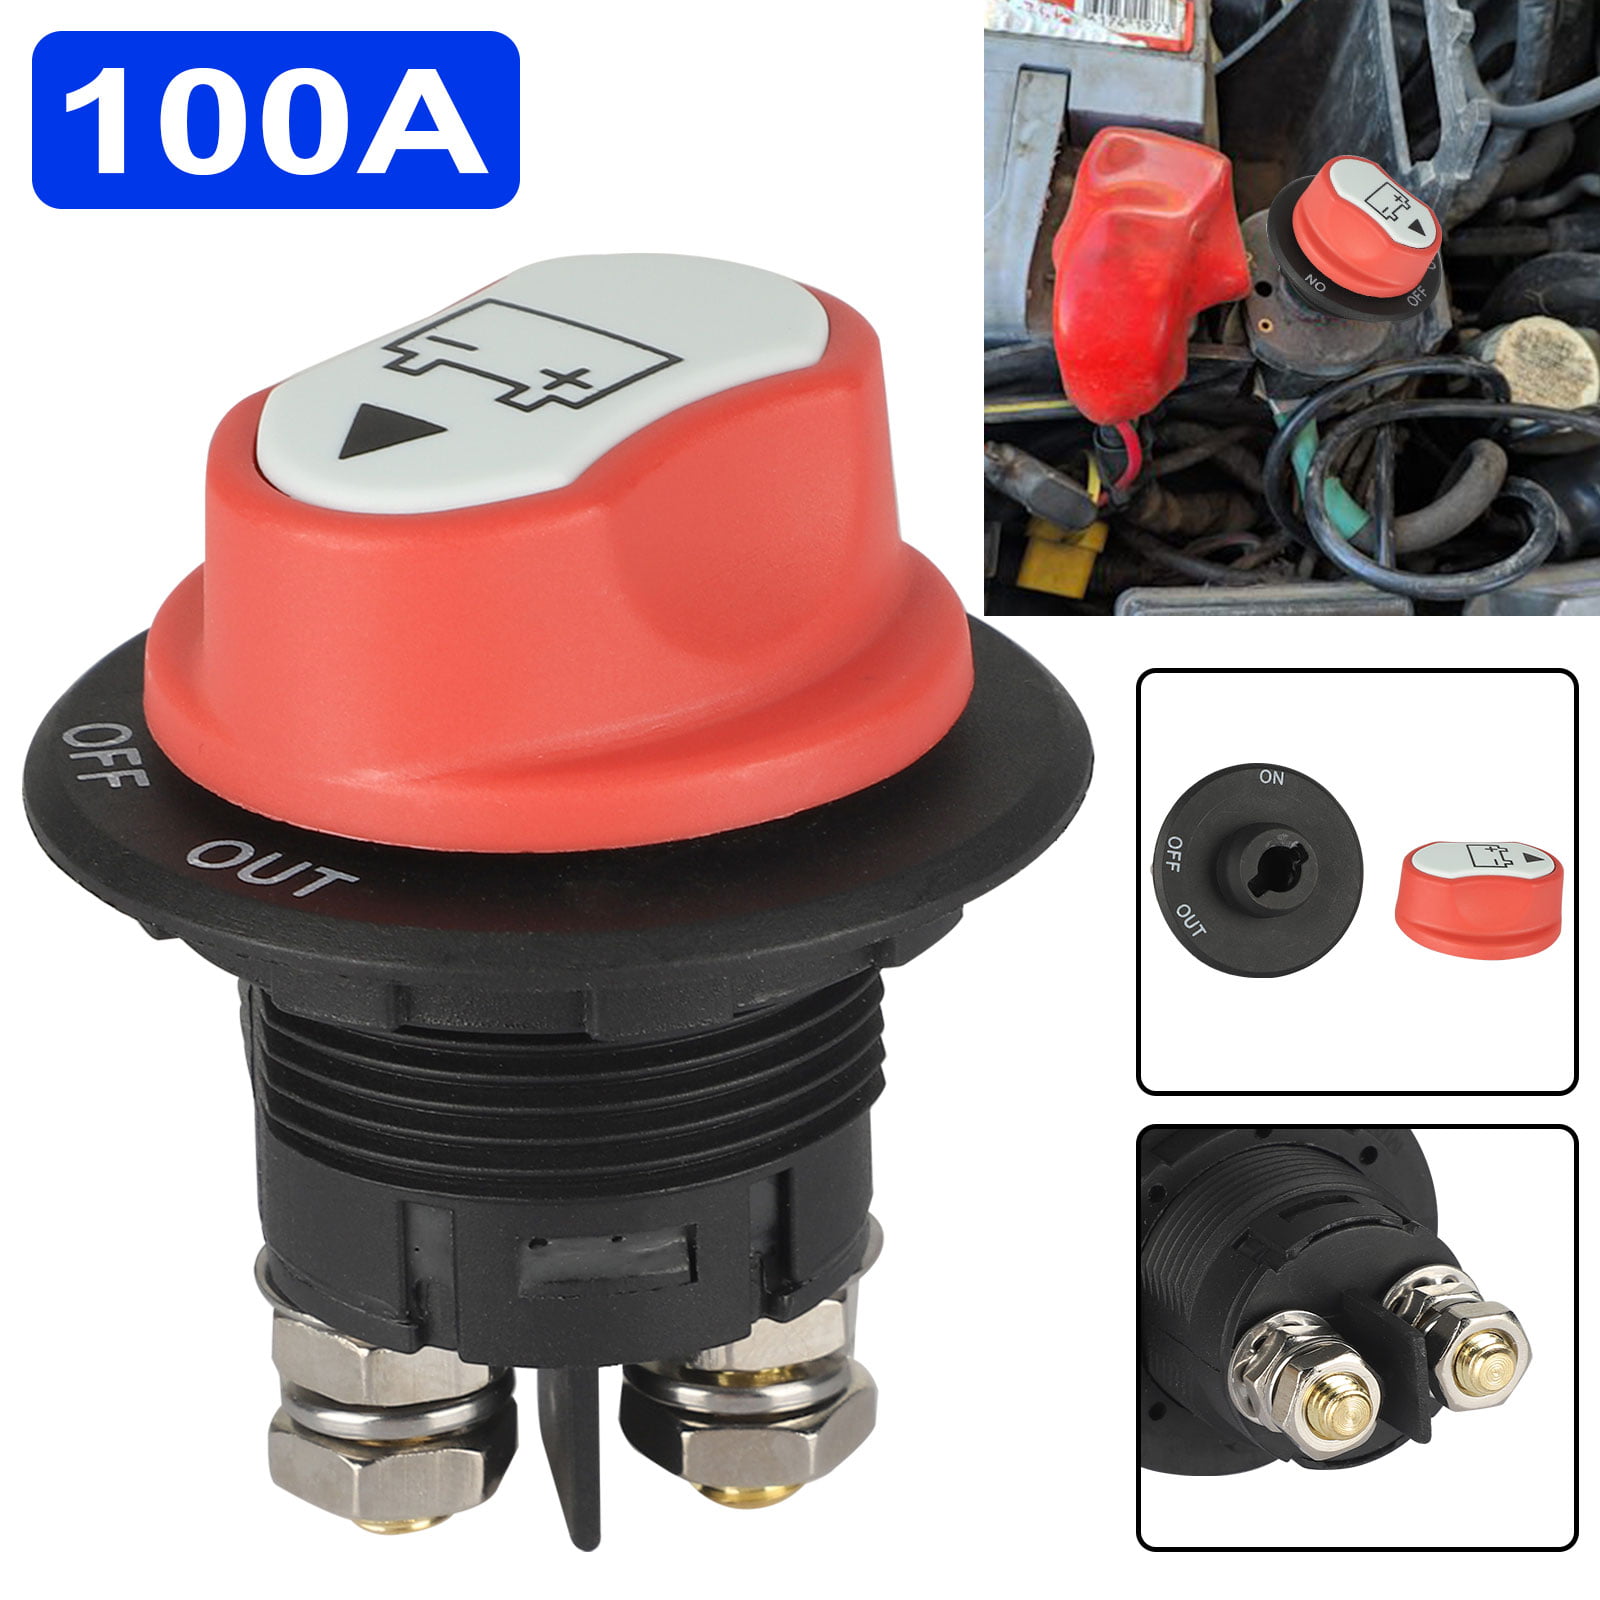 MIDIYA Battery Disconnect Isolator Master Switch 12V/24V 200A-500A for 5 seconds Car with 2 Removable Key Yacht Rotary Switch Isolator Master Power Cut Out/Off Kill Switch 